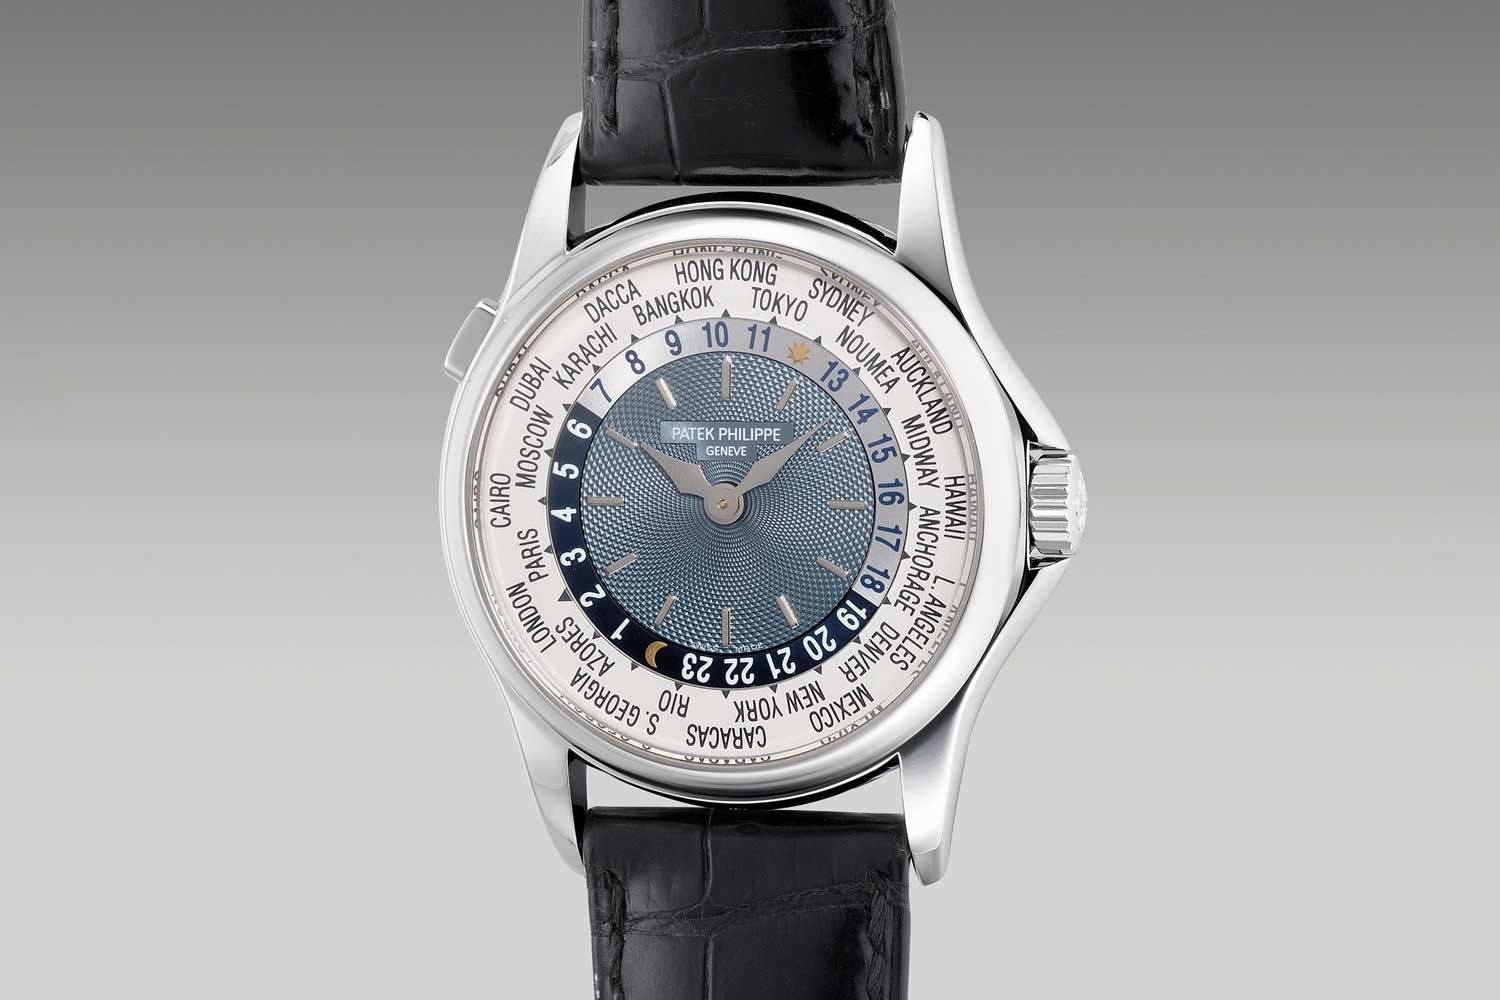 Introduced at the Baselworld fair in 2000, the ref. 5110 was a subtle nod to the reference 96 HU